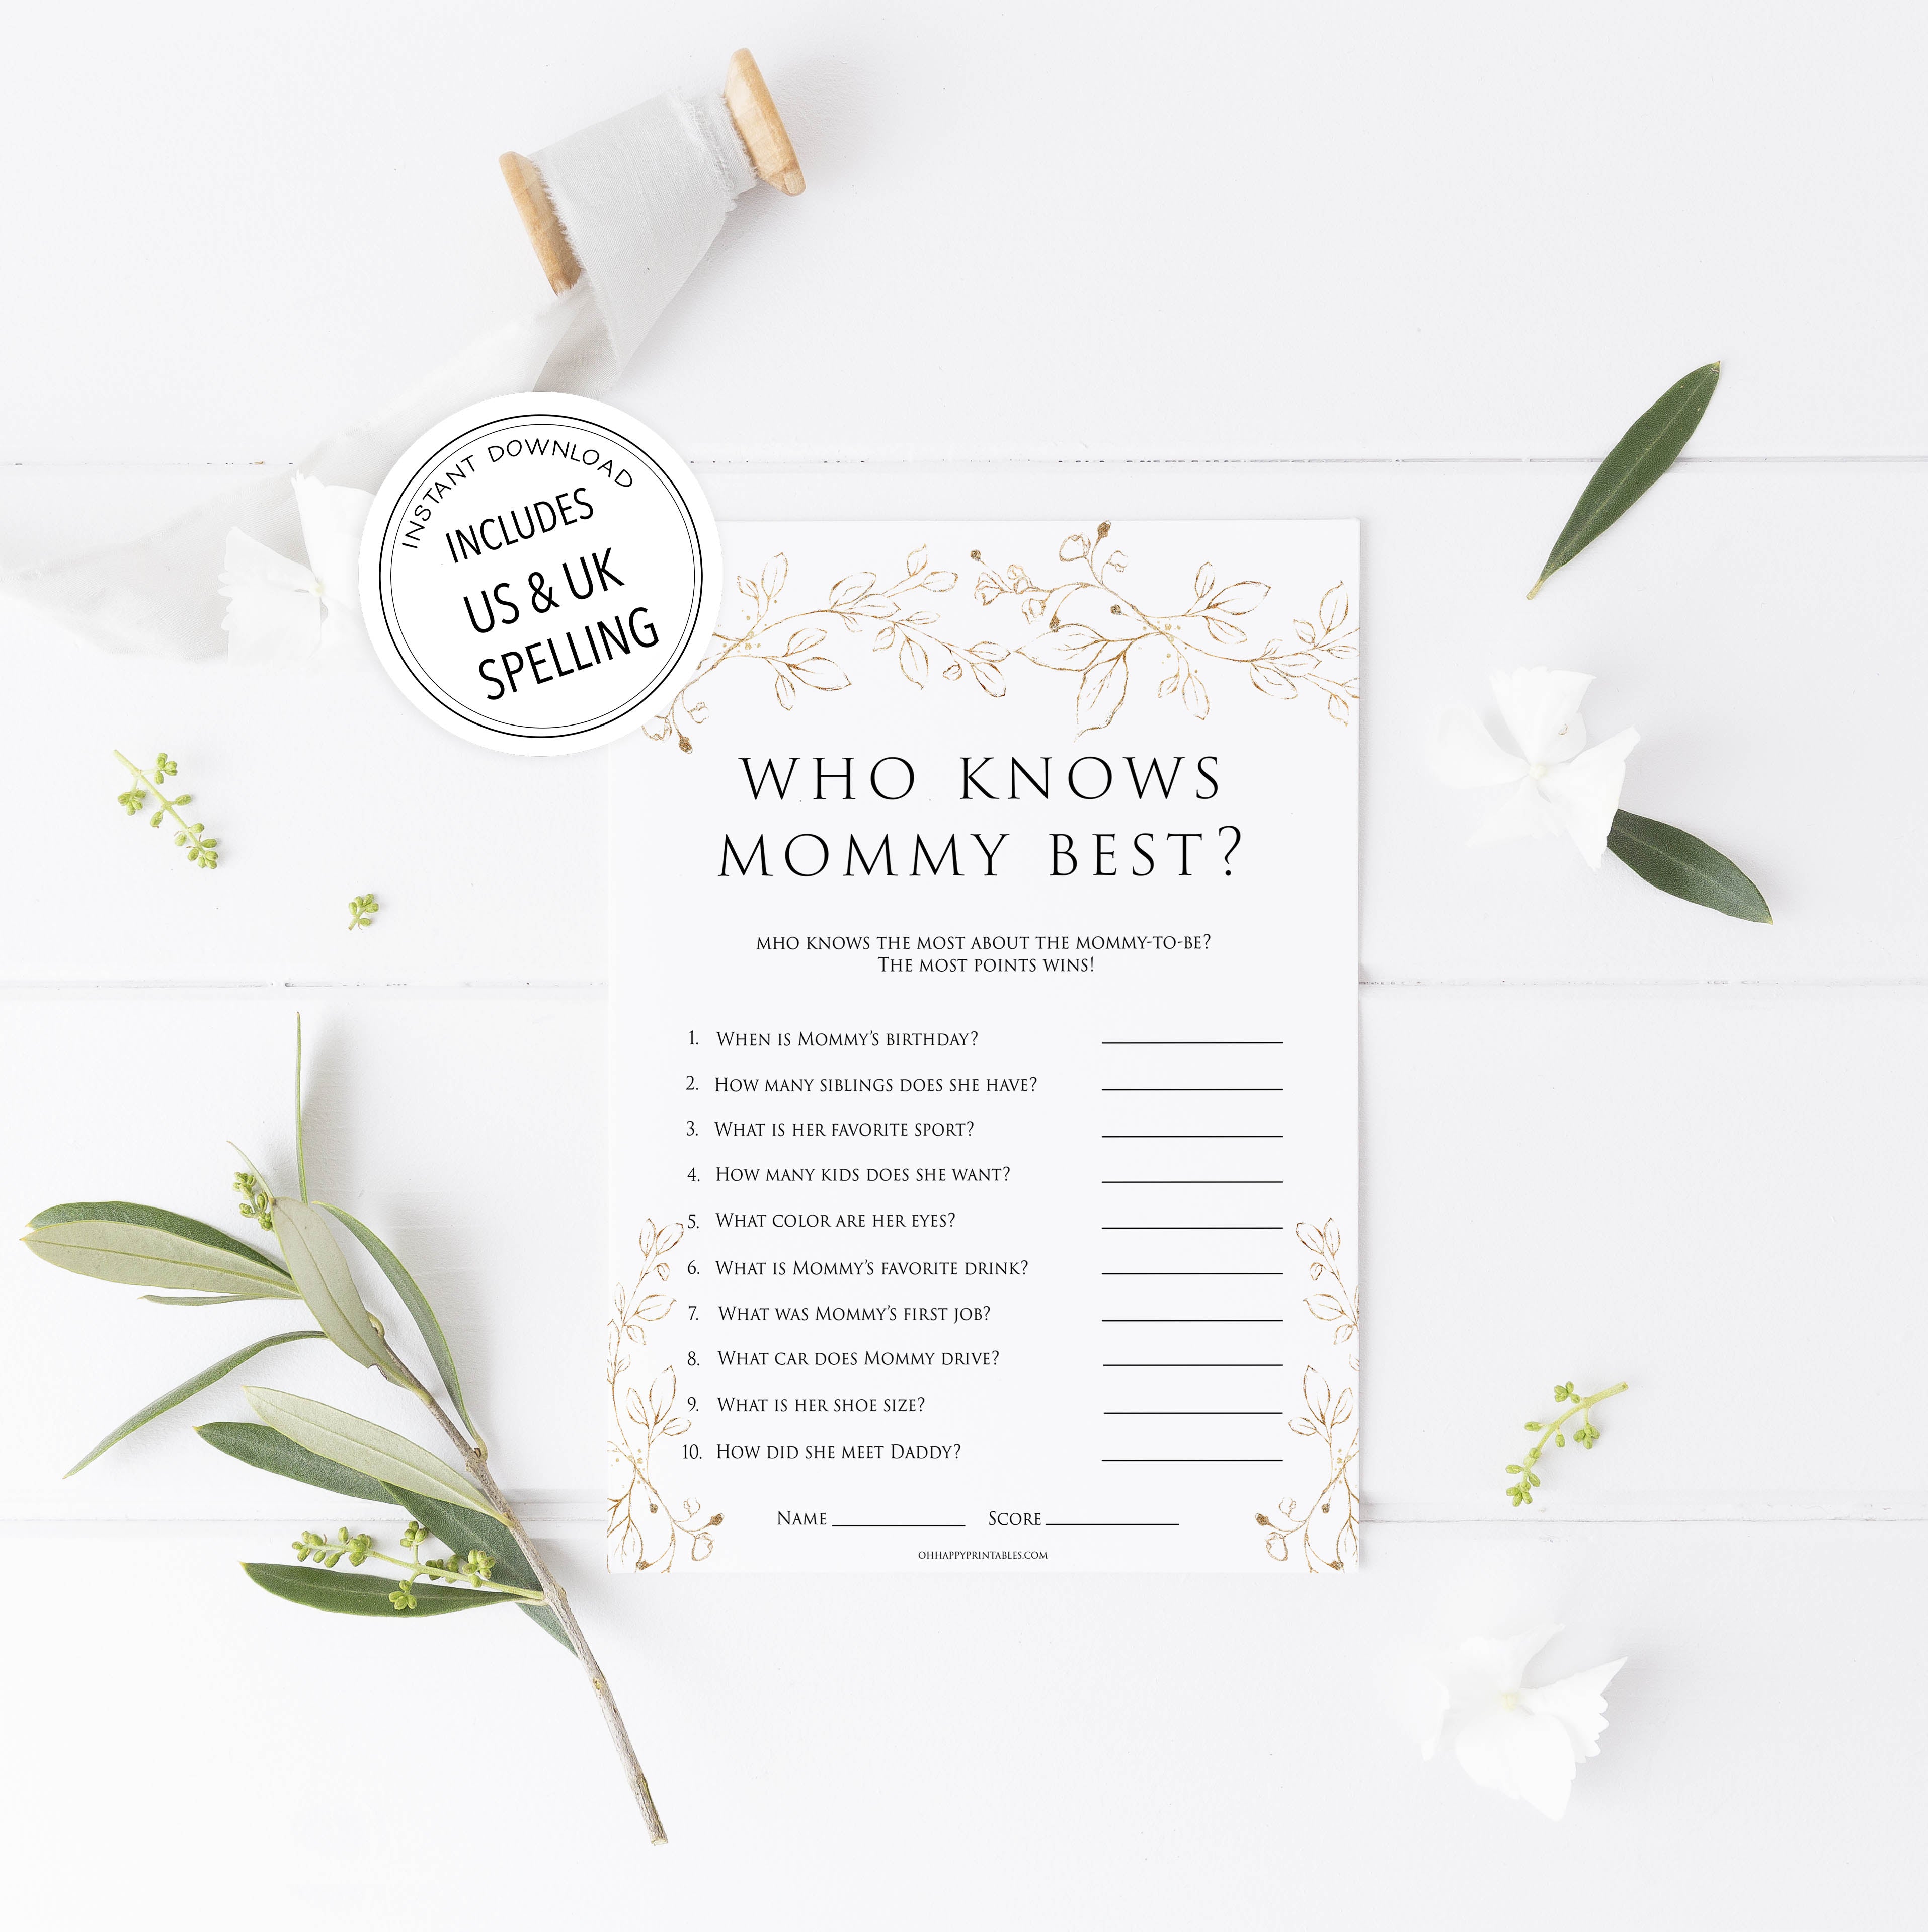 who knows mommy best baby game, Printable baby shower games, gold leaf baby games, baby shower games, fun baby shower ideas, top baby shower ideas, gold leaf baby shower, baby shower games, fun gold leaf baby shower ideas